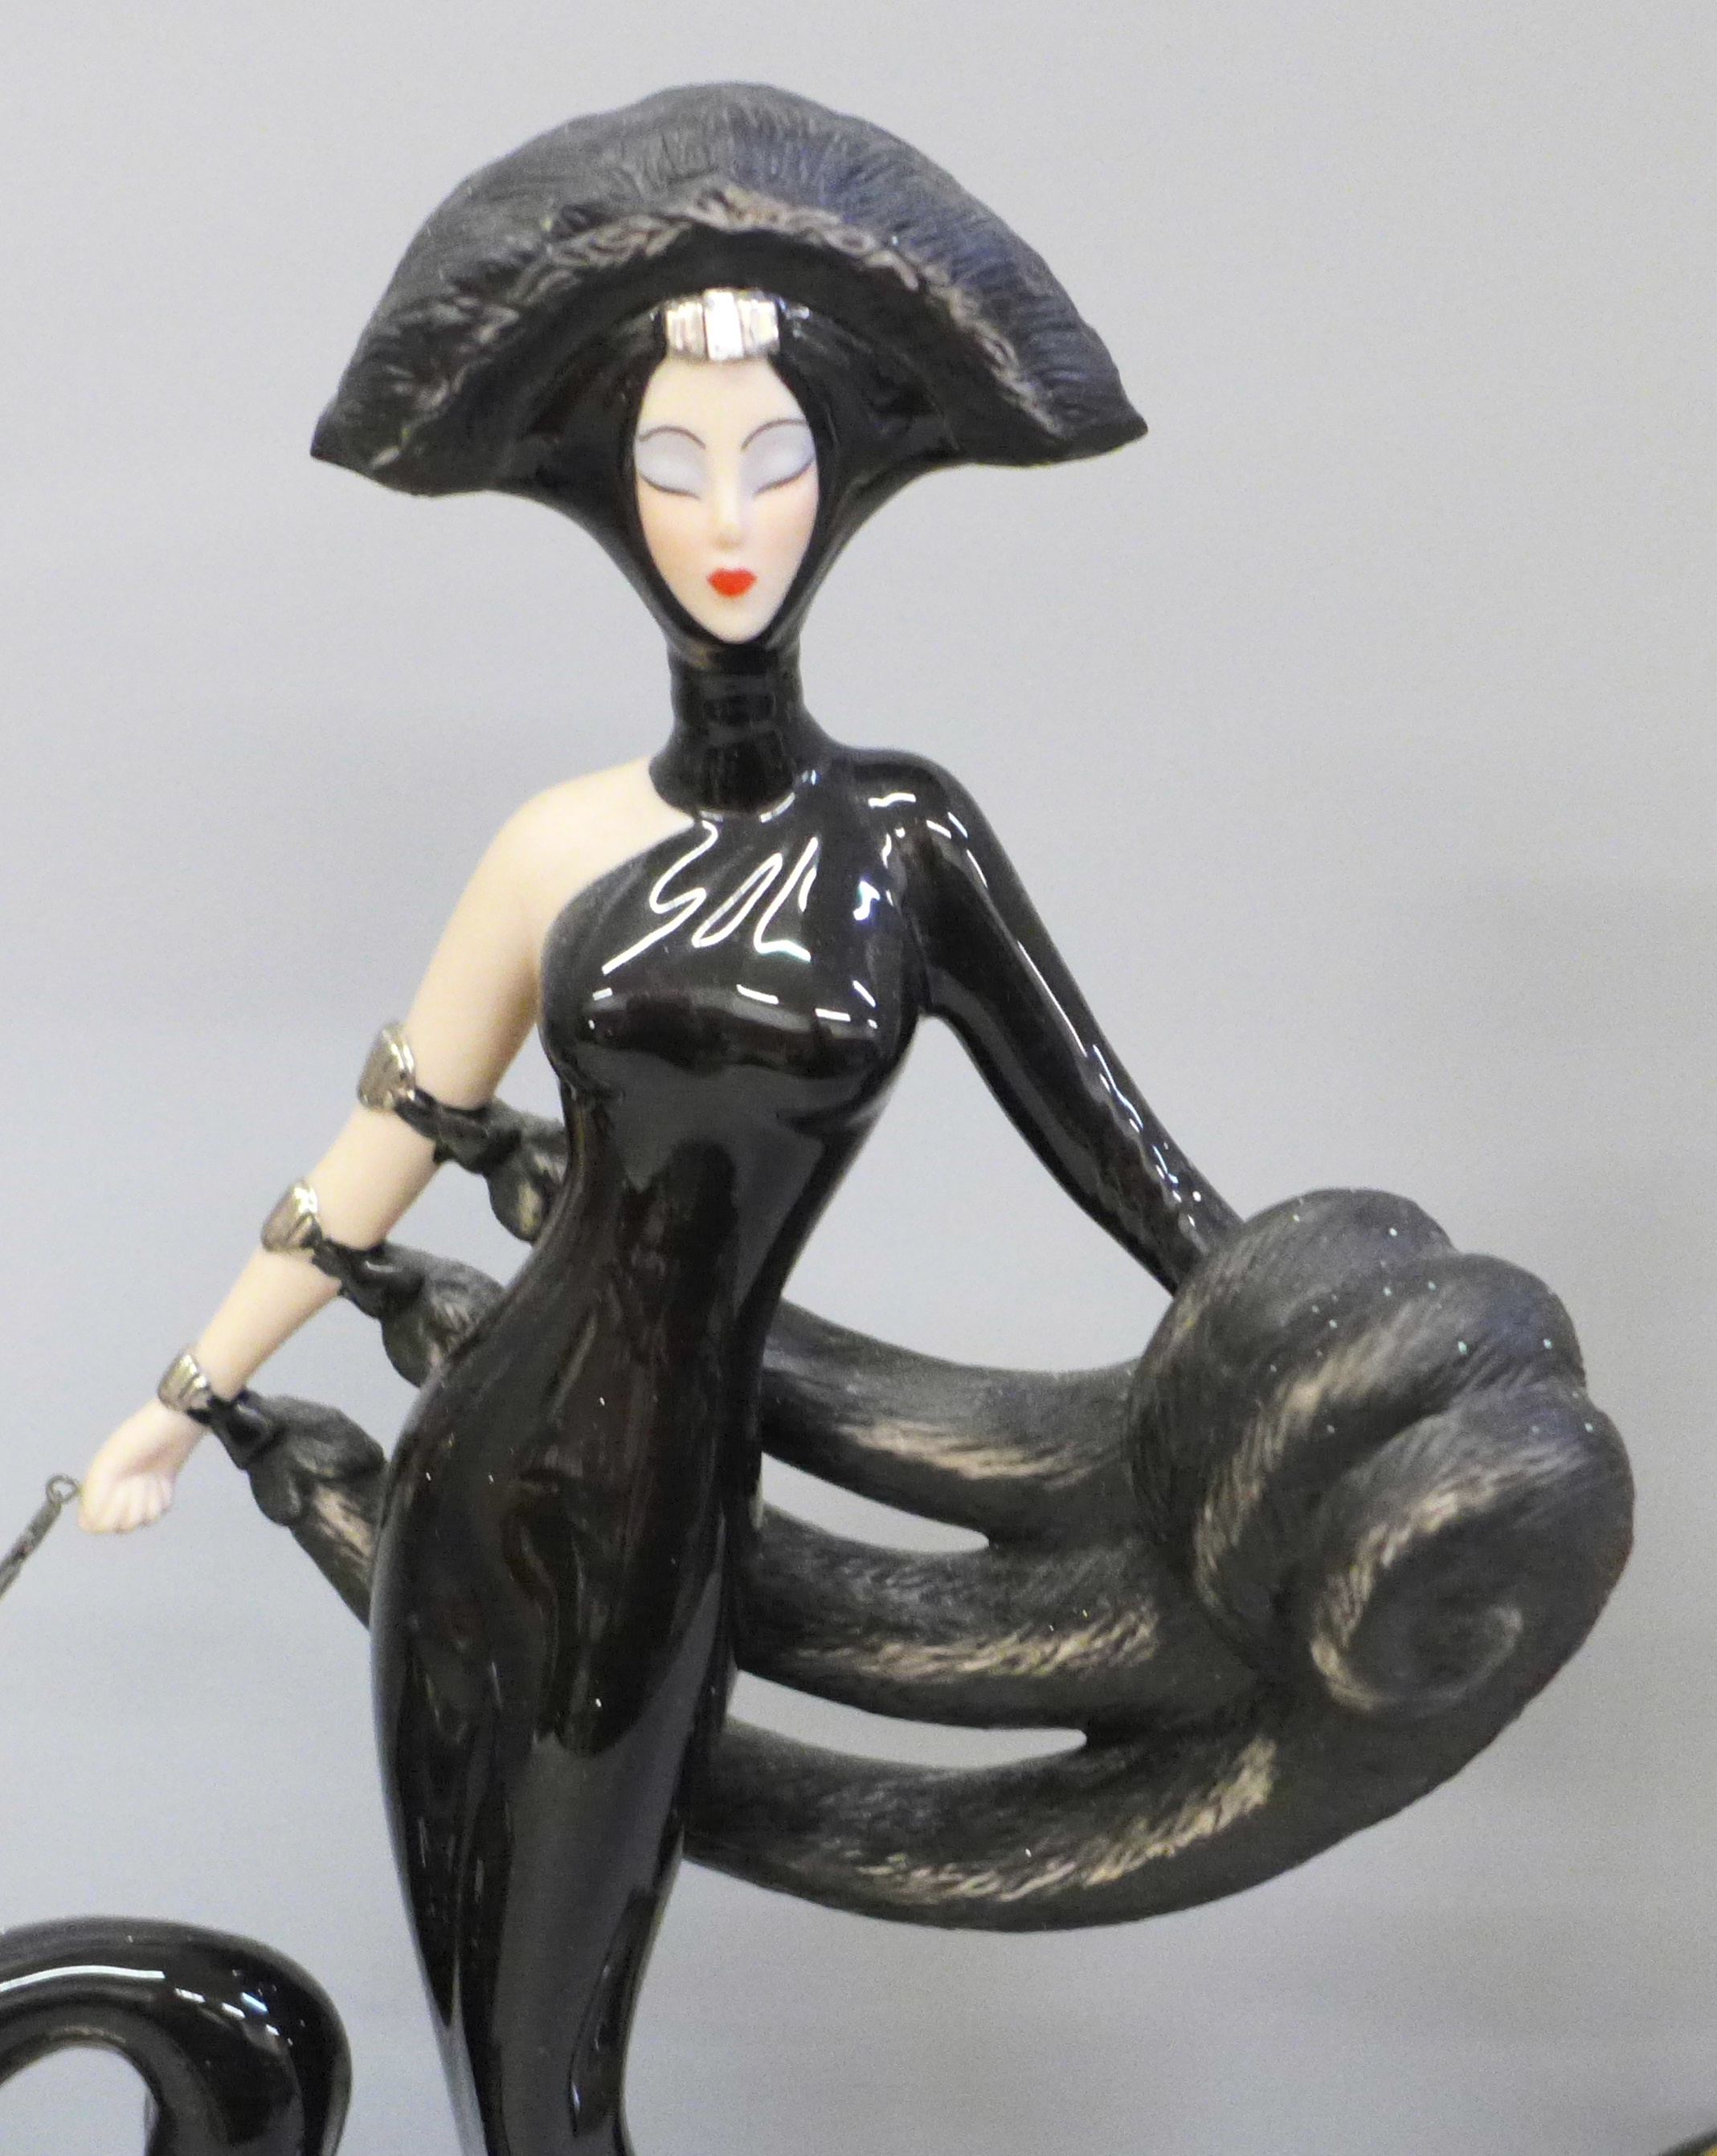 Three House of Erte figures, all limited edition, Isis, Symphone in Black and Leopard - Image 3 of 7